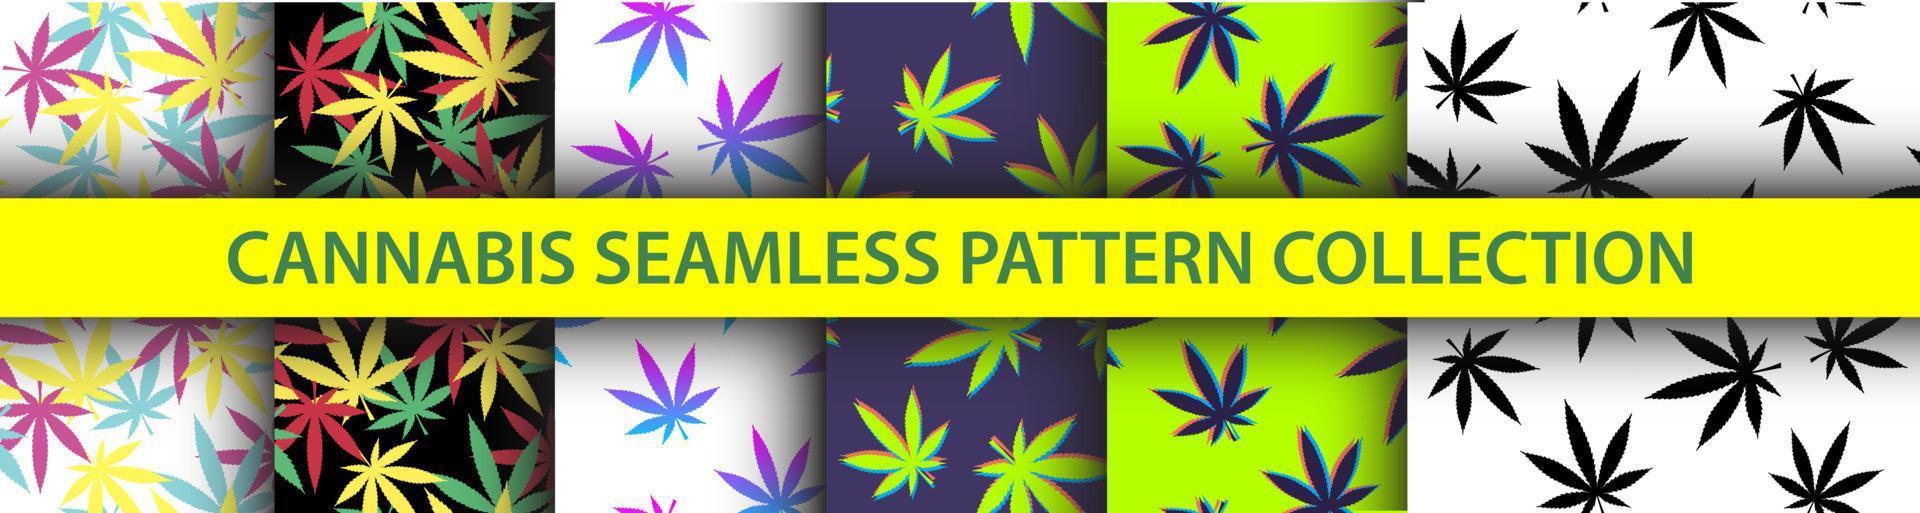 420 Seamless Pattern Collection. Psychedelic graphic vector set. Marijuana inspired design pack. 3D Pot silhouettes. Reggae background with cannabis leaves. Textile visual content.